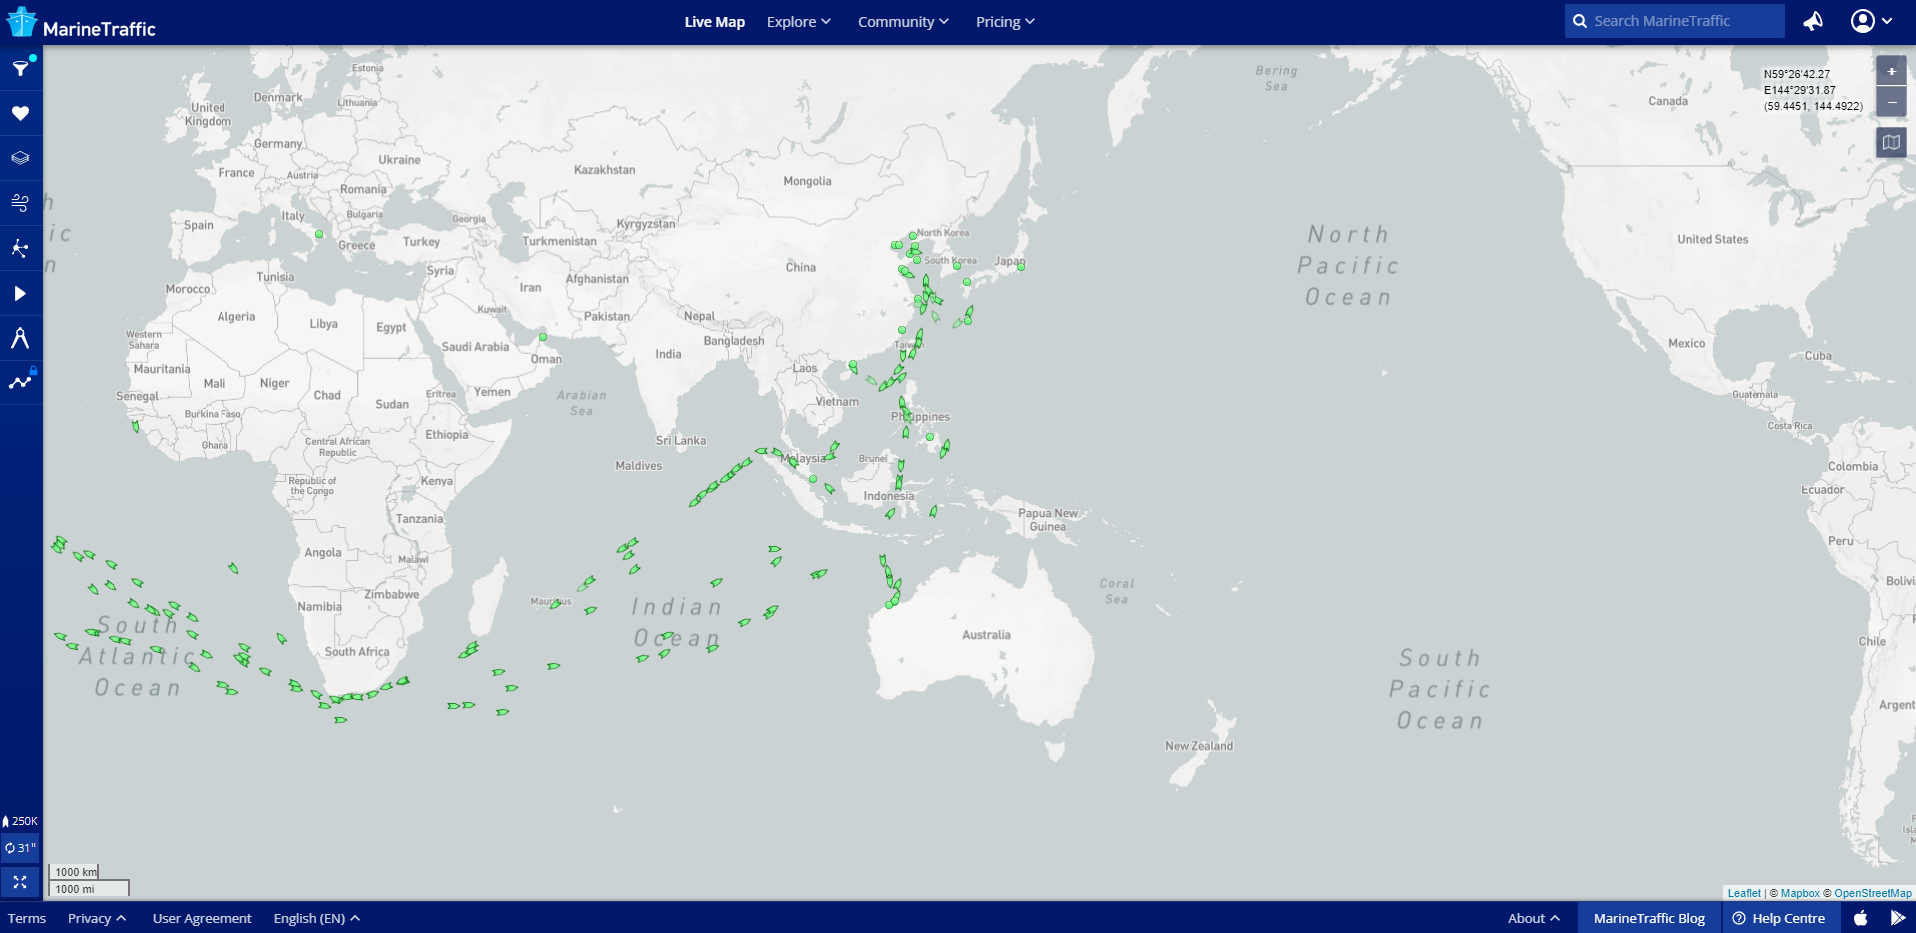 MarineTraffic Live Map shows current iron ore vessel movements between Australia and Japan